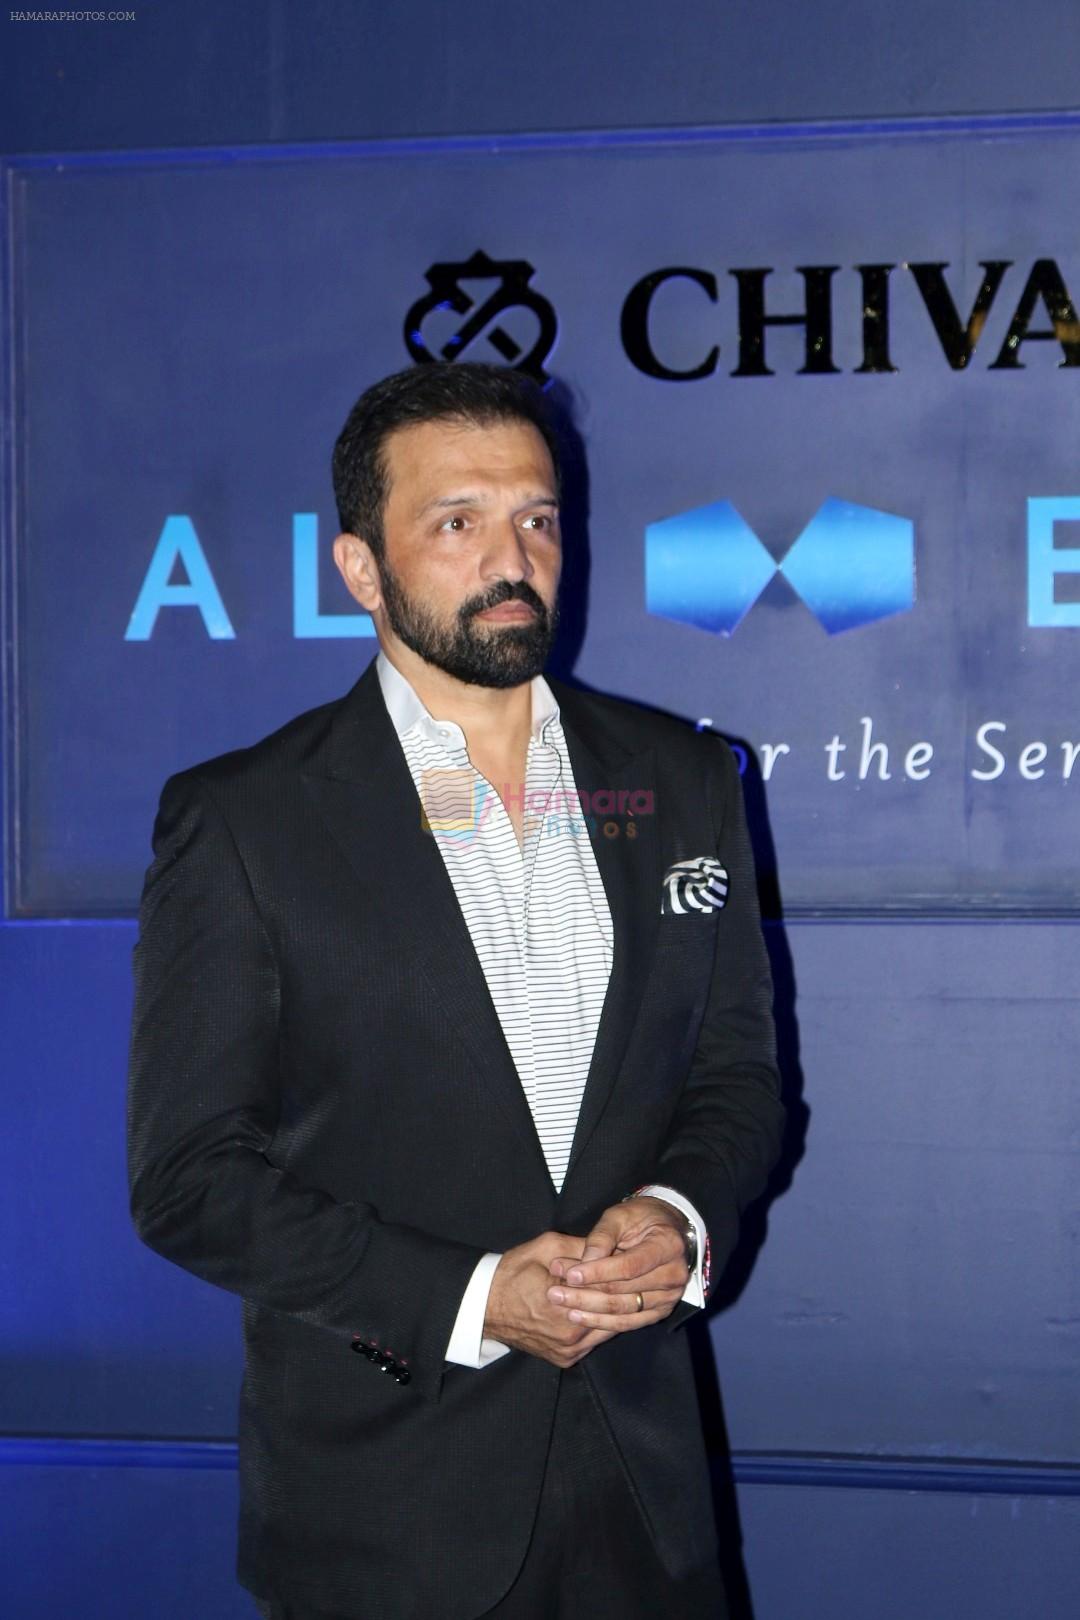 at Chivas Regal 18 Alchemy-Crafted For The Senses on 25th March 2017